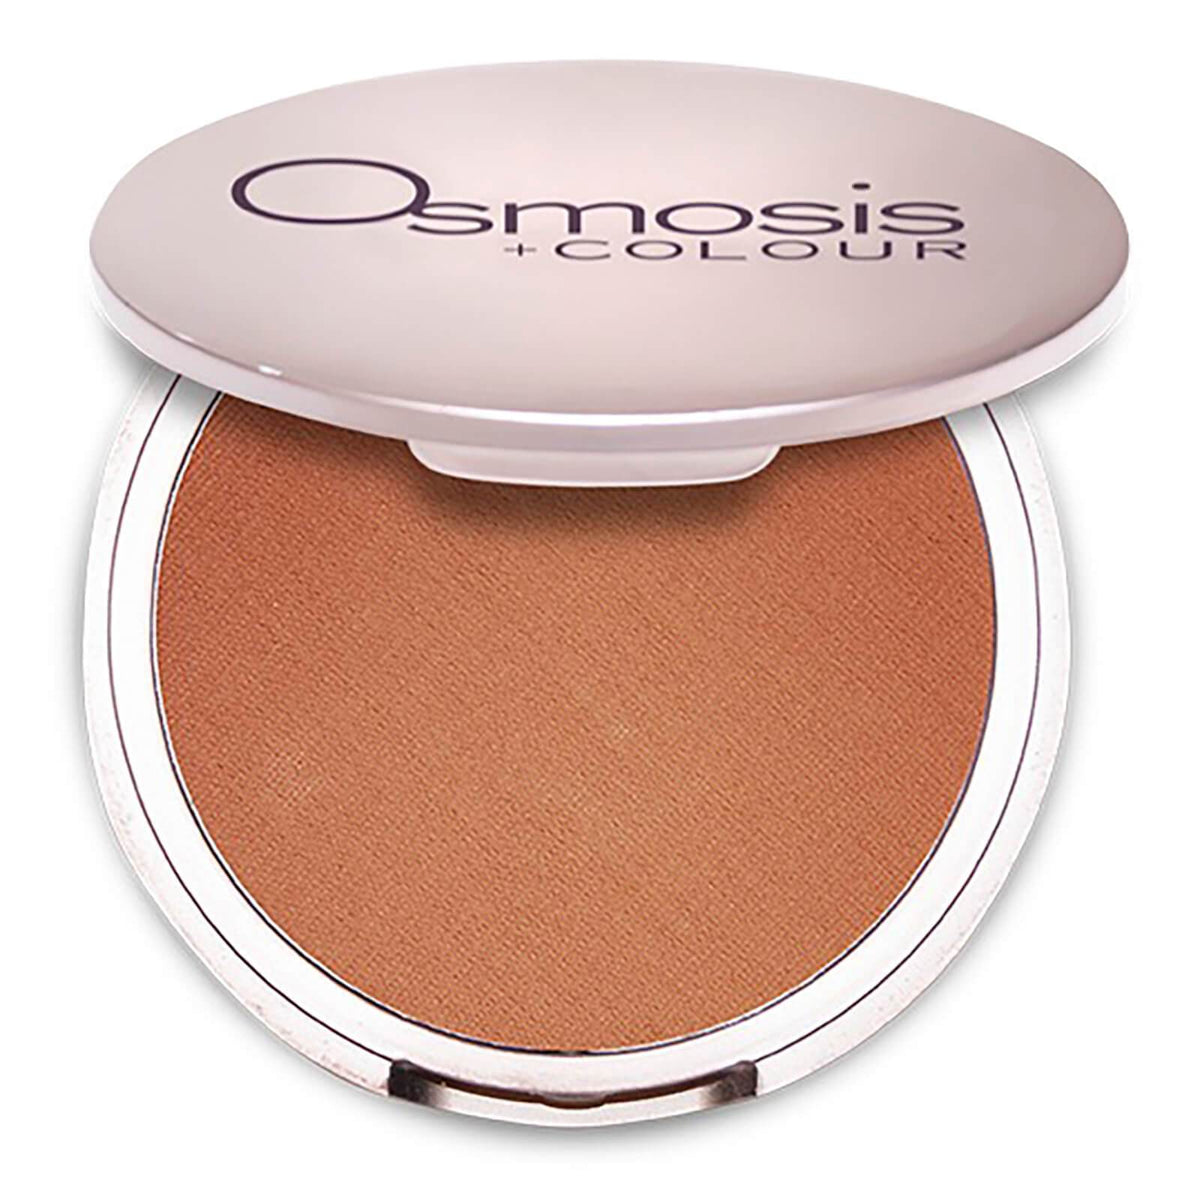 Osmosis Beauty South Beach Mineral Bronzer